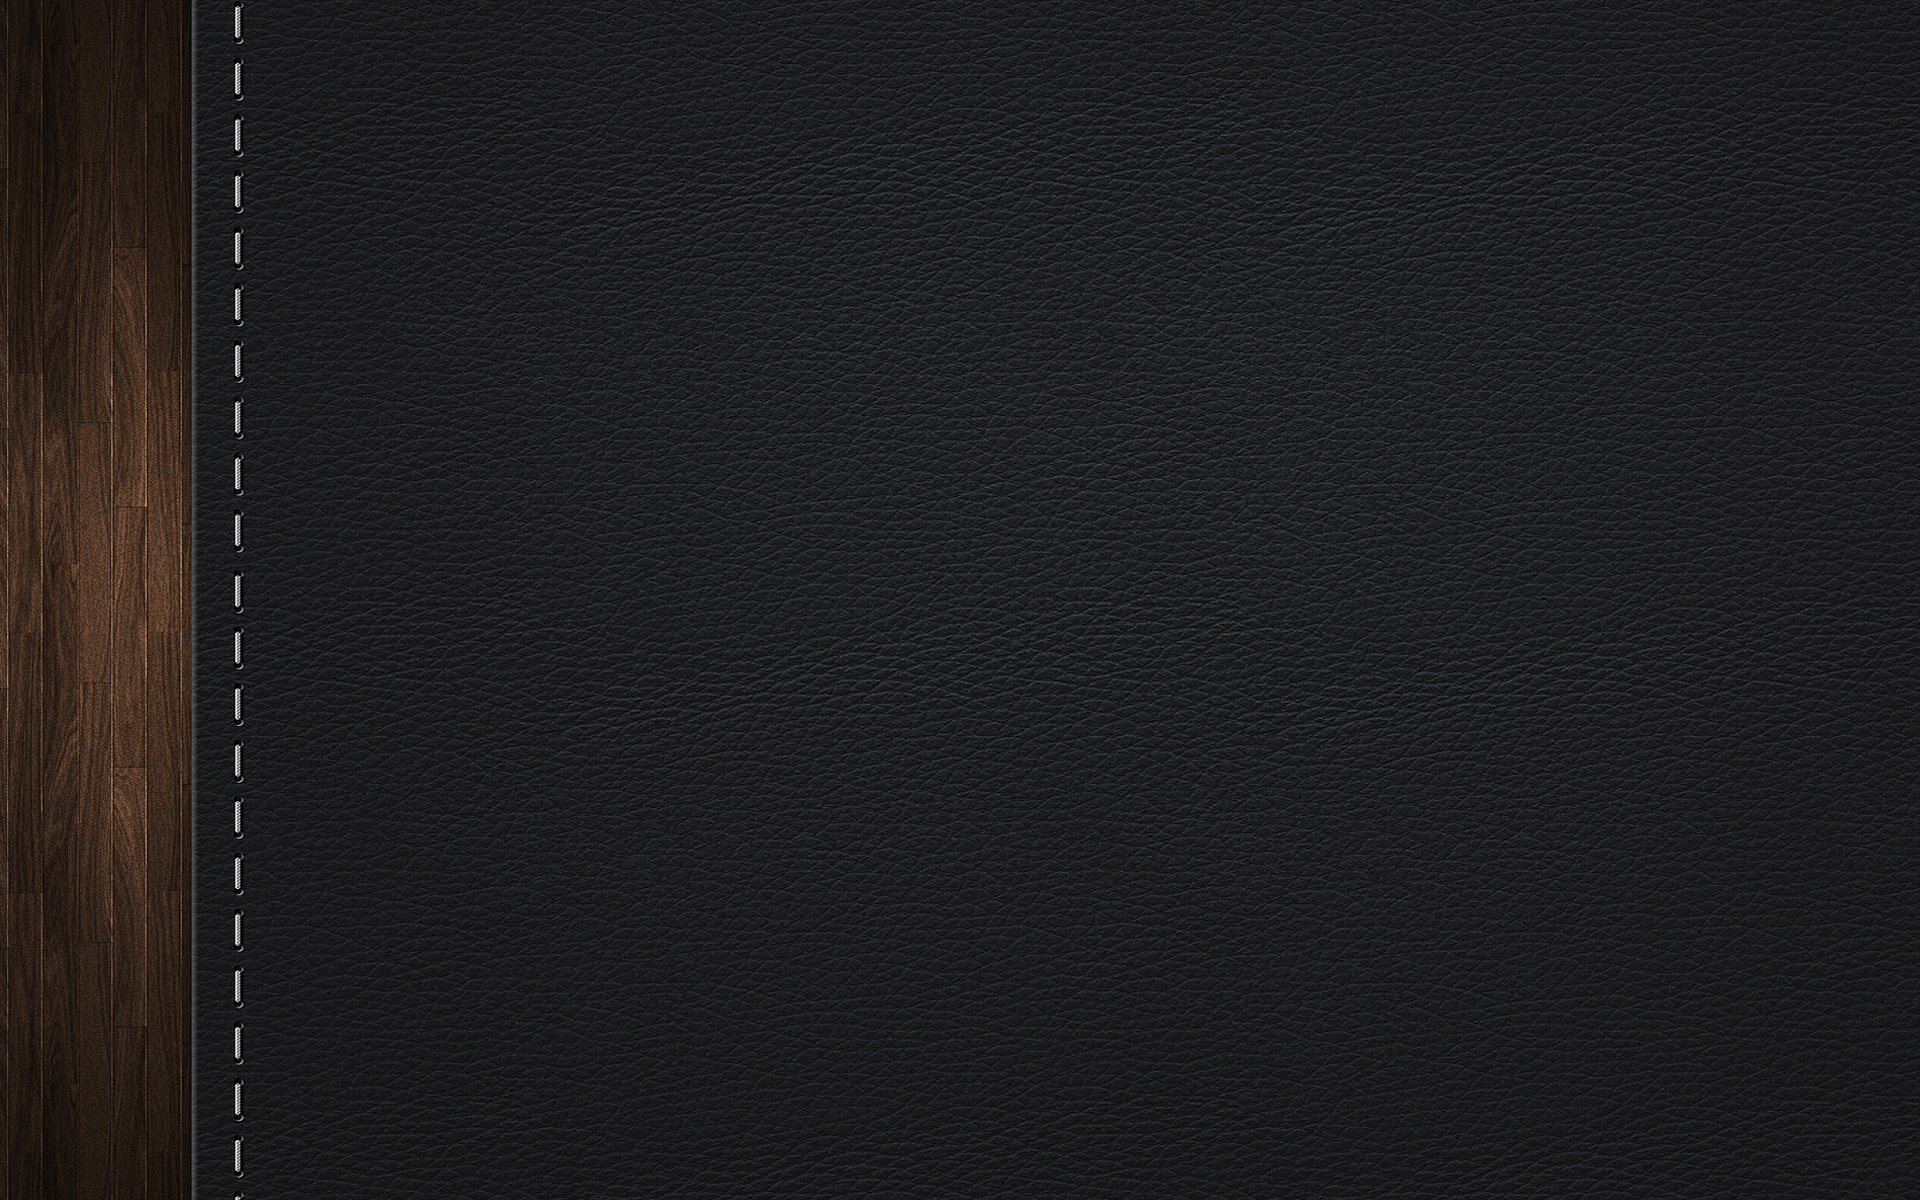 Leather Texture wallpaper   890195